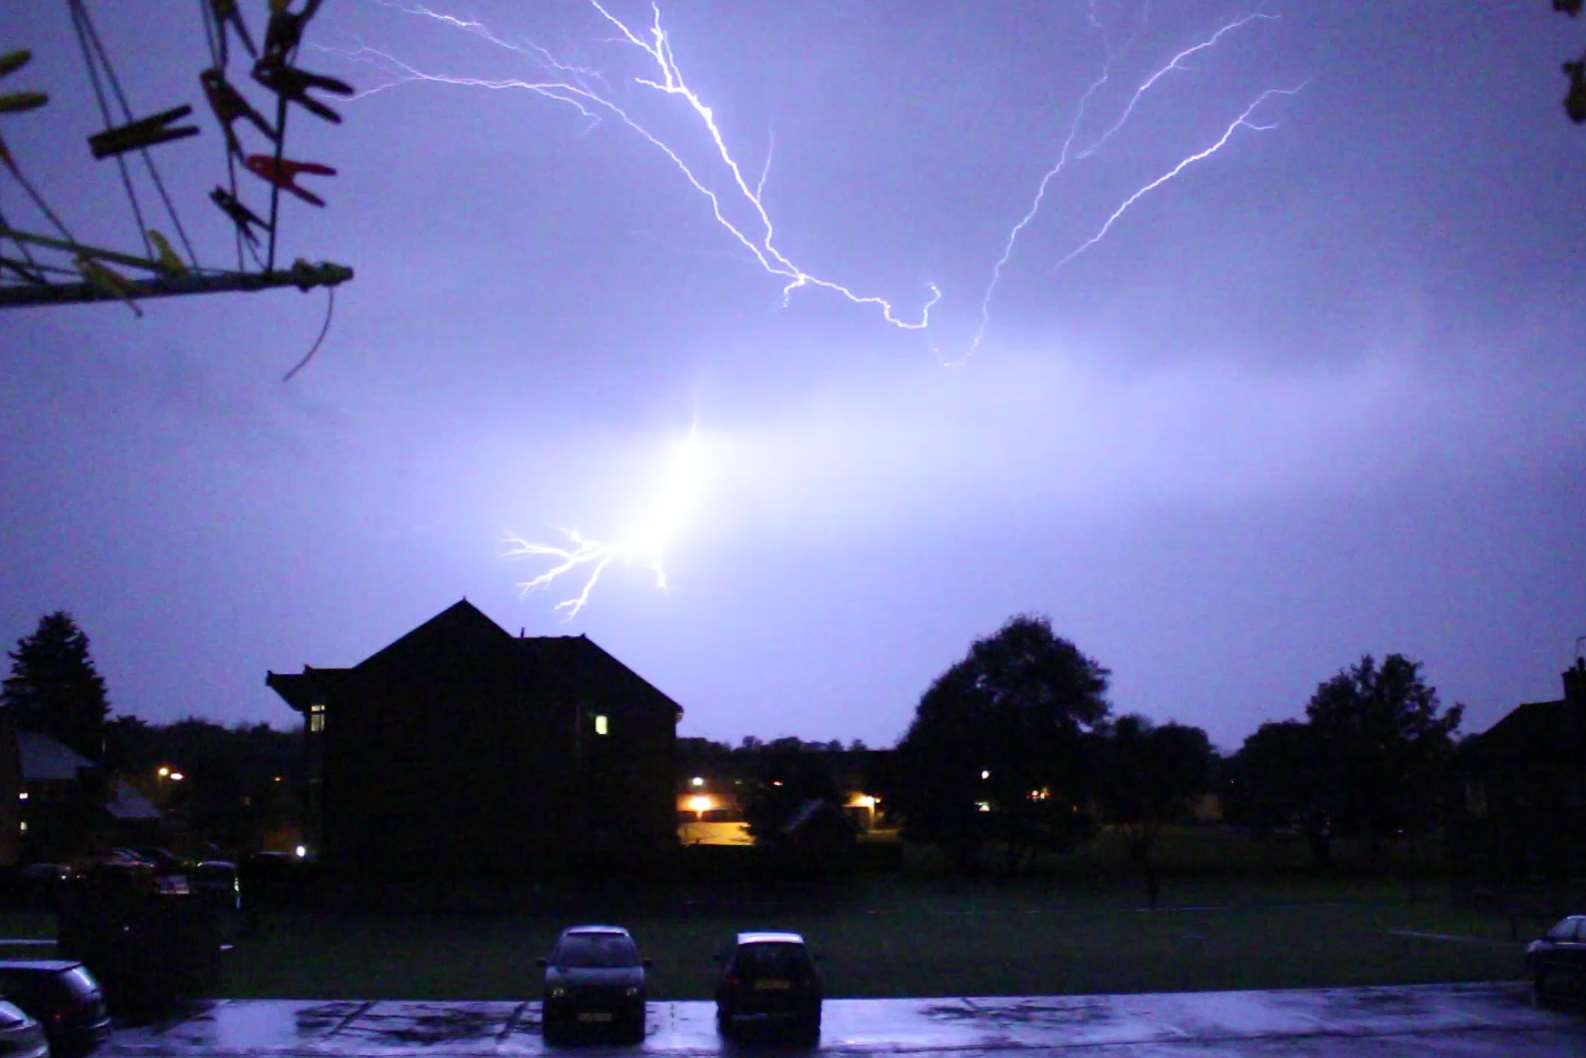 The skies in Maidstone are lit up spectacularly. Picture: Nicholas Harper